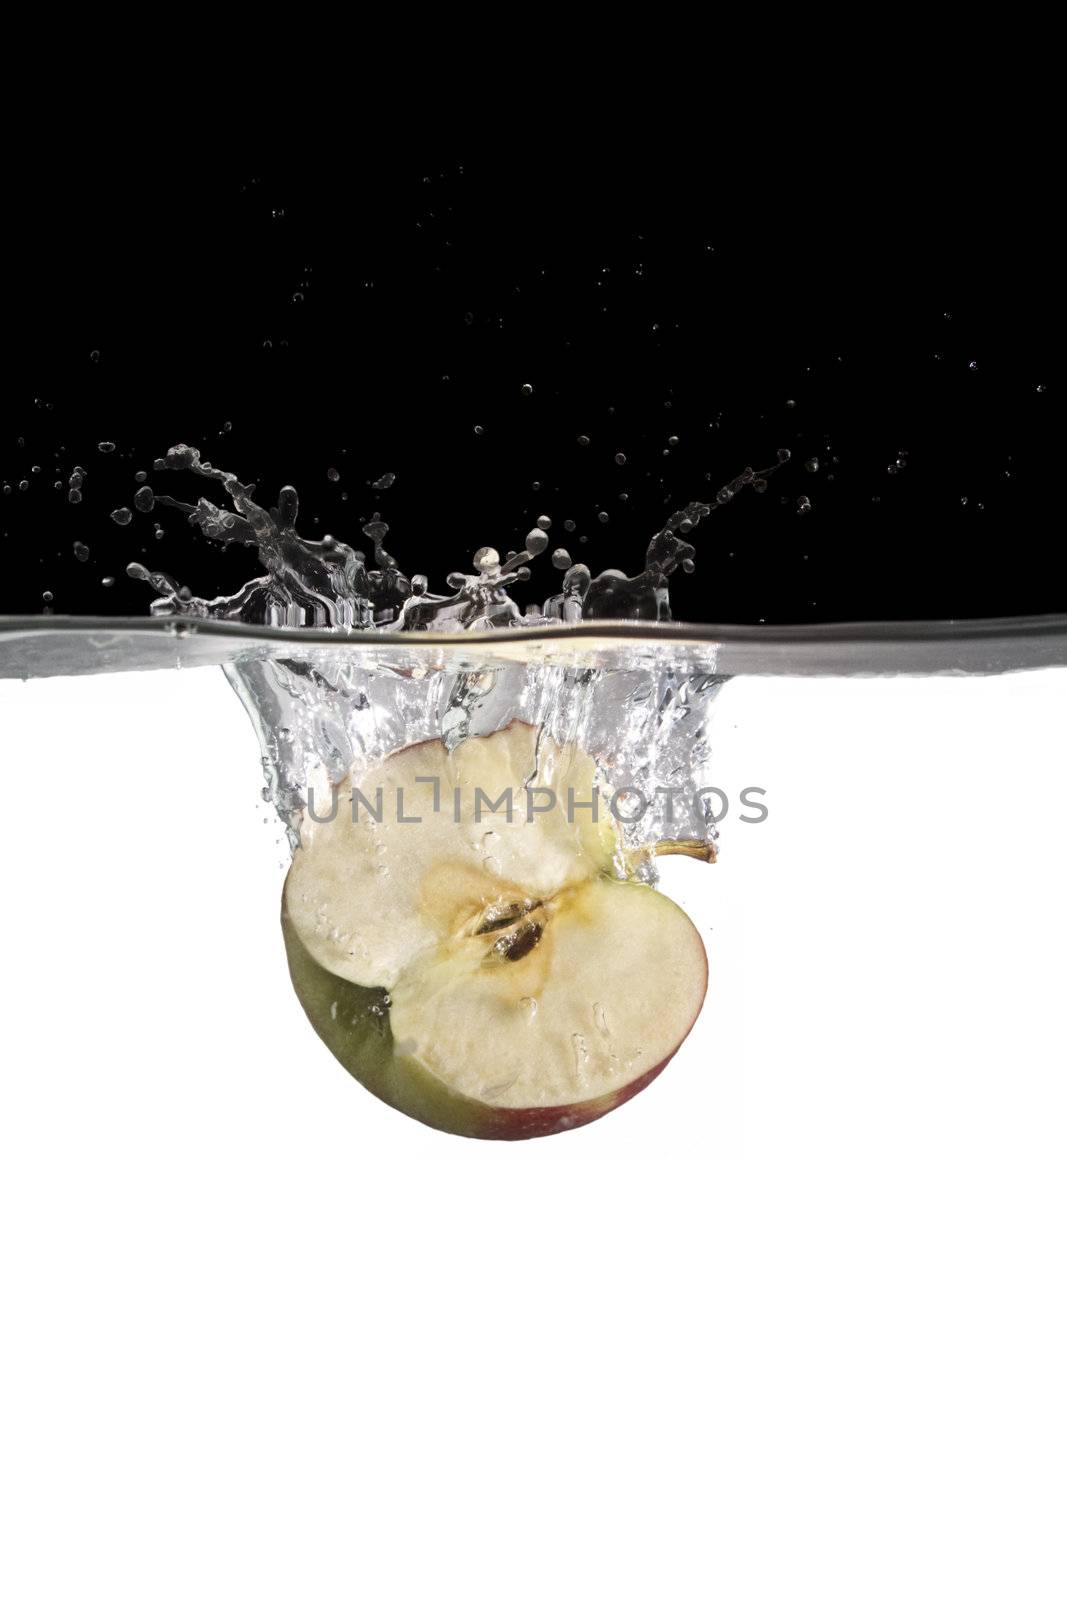 one apple slice in water with black and white background